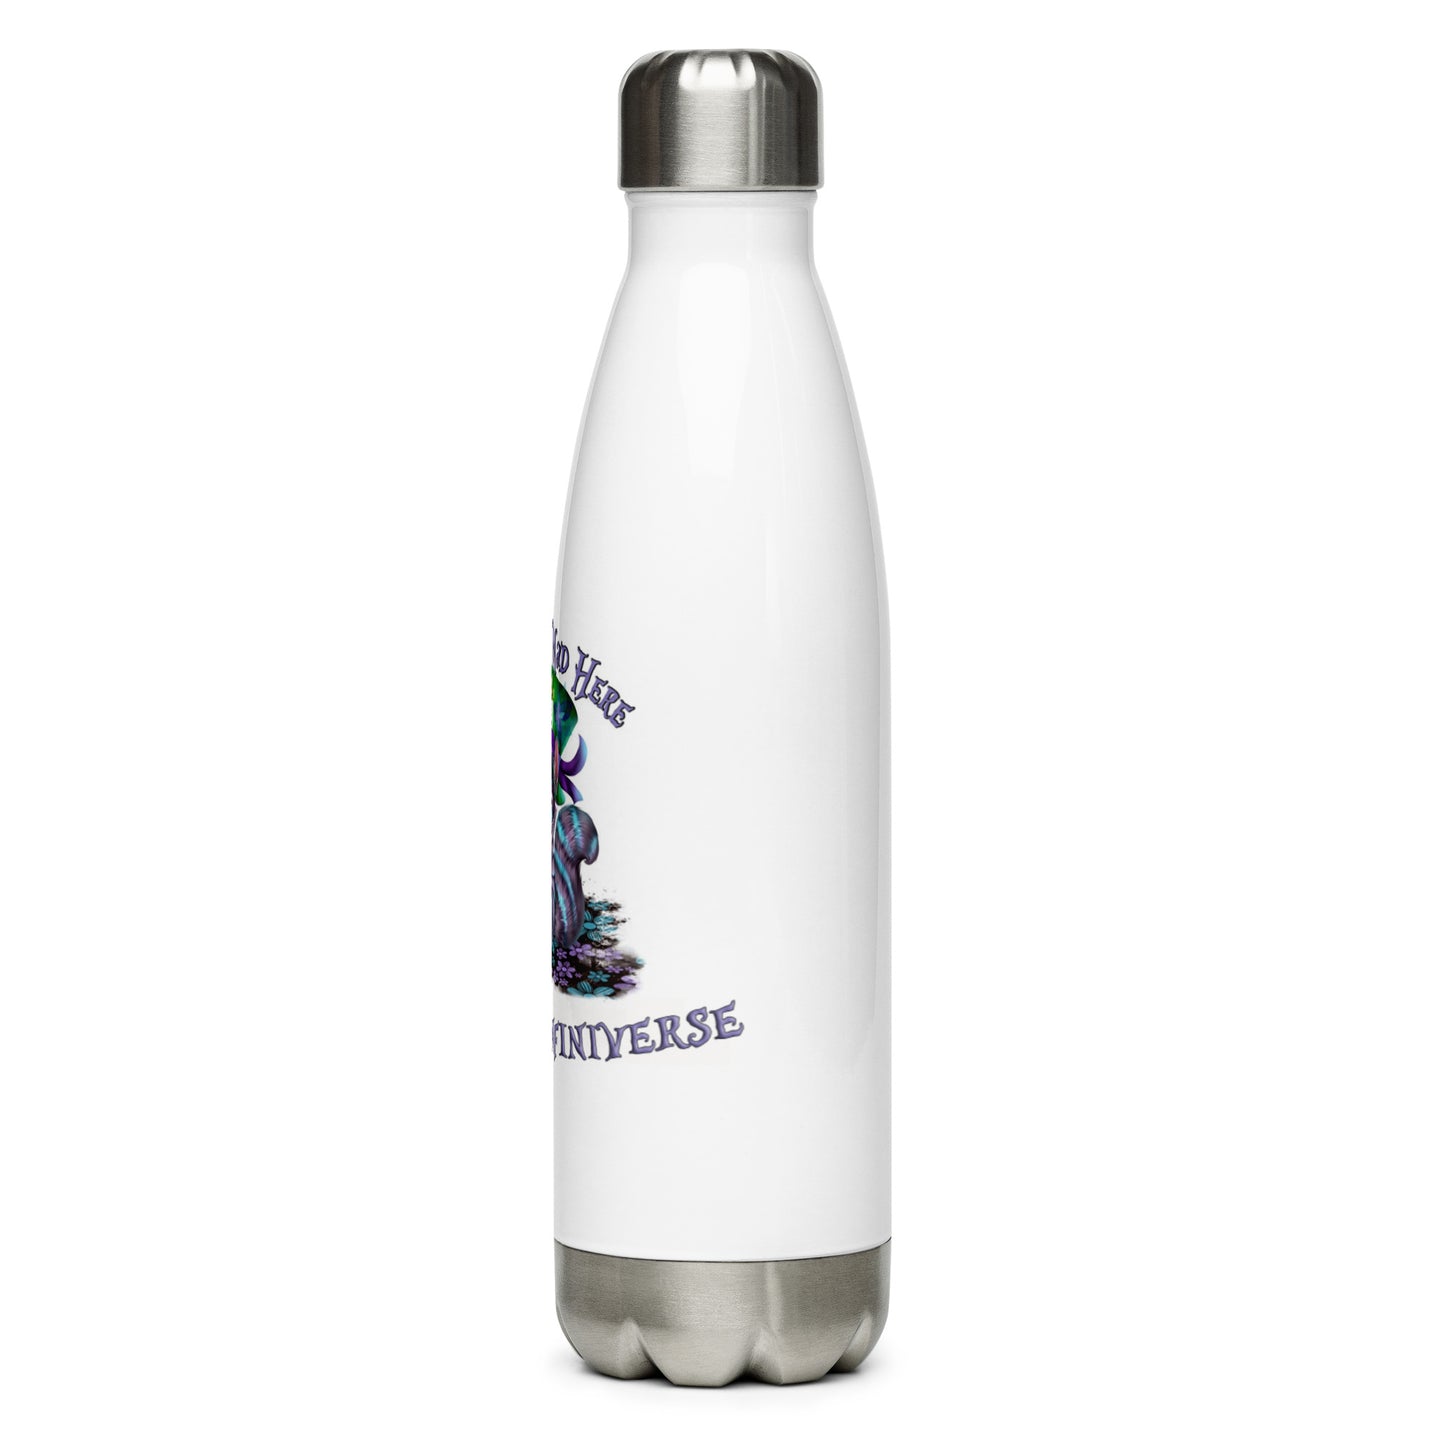 We're All Mad Here in the Infiniverse Water Bottle